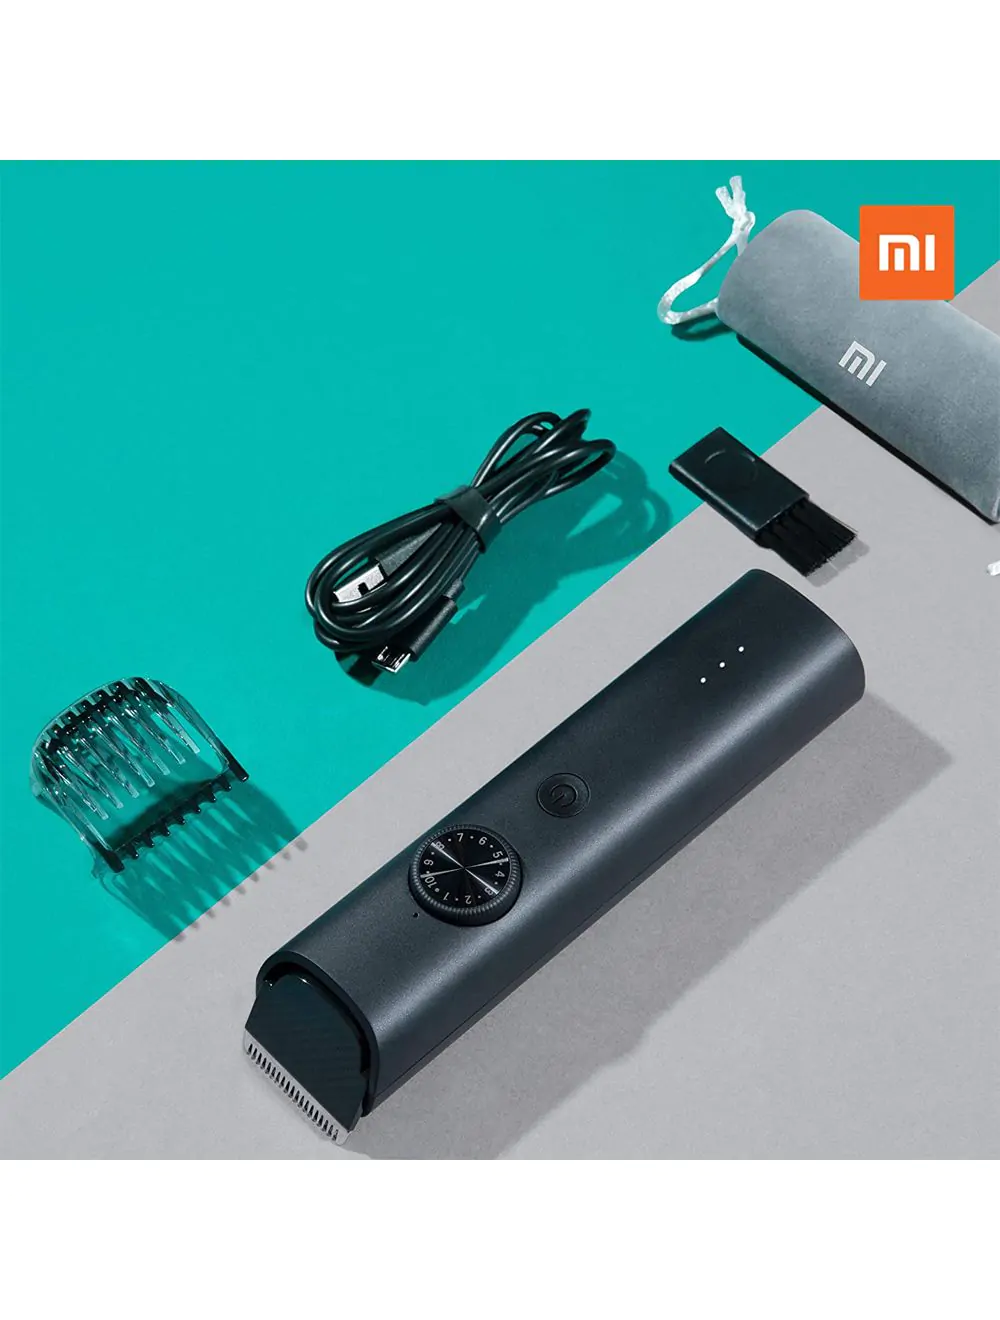 MI Cordless Beard Trimmer 1C, with 20 length settings, 60 MInutes of usage, & USB charging